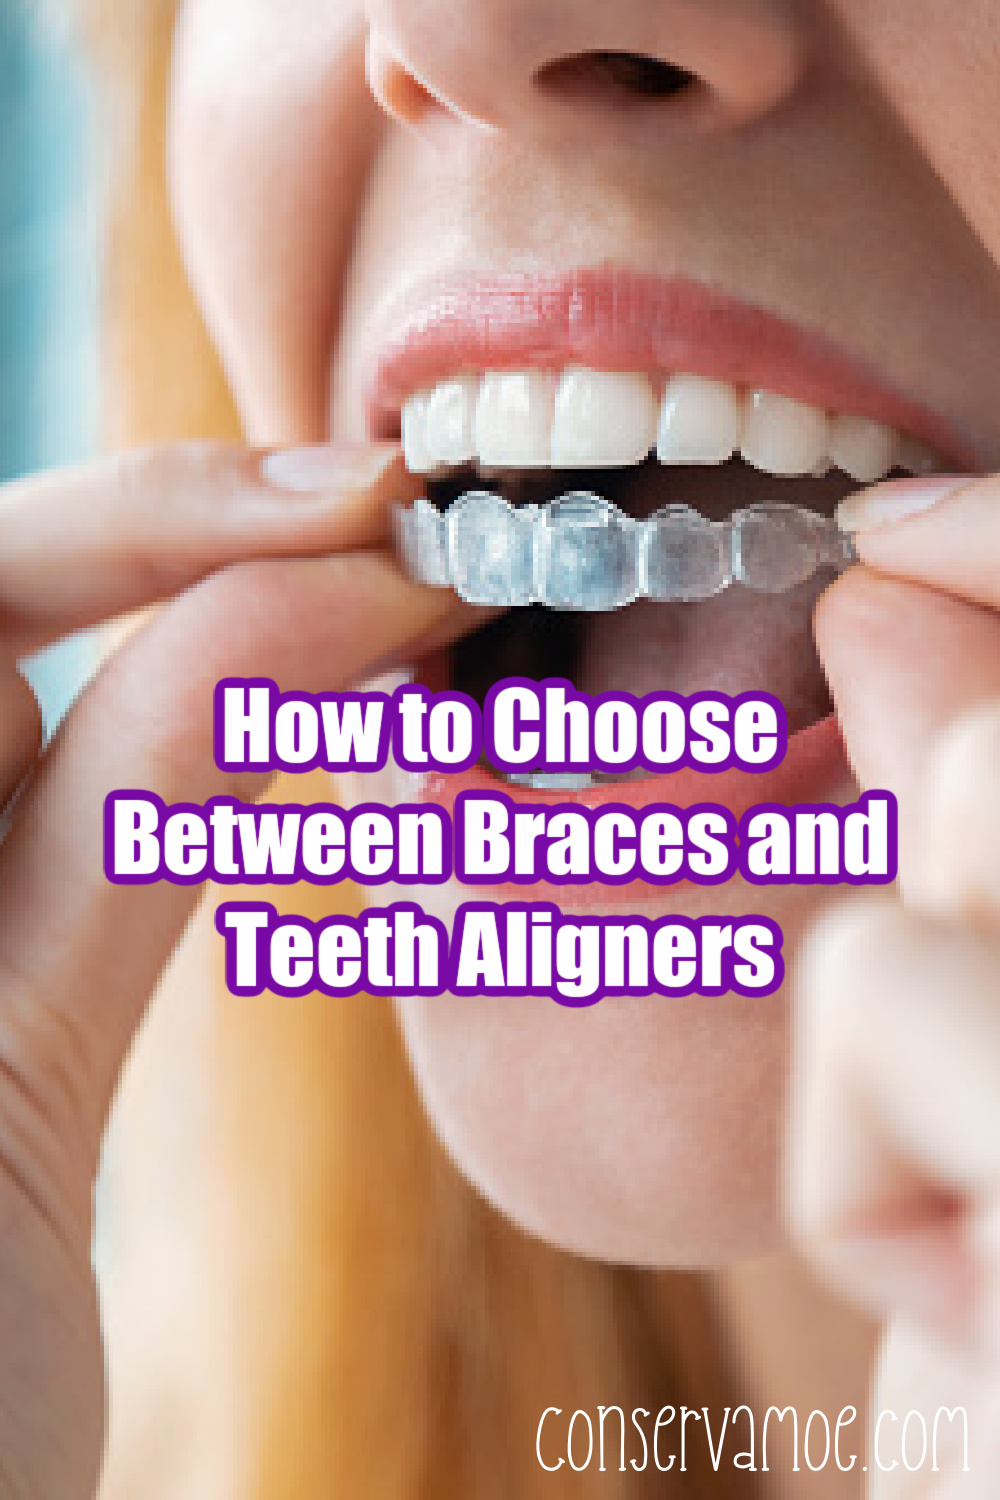 Braces for Crooked Teeth